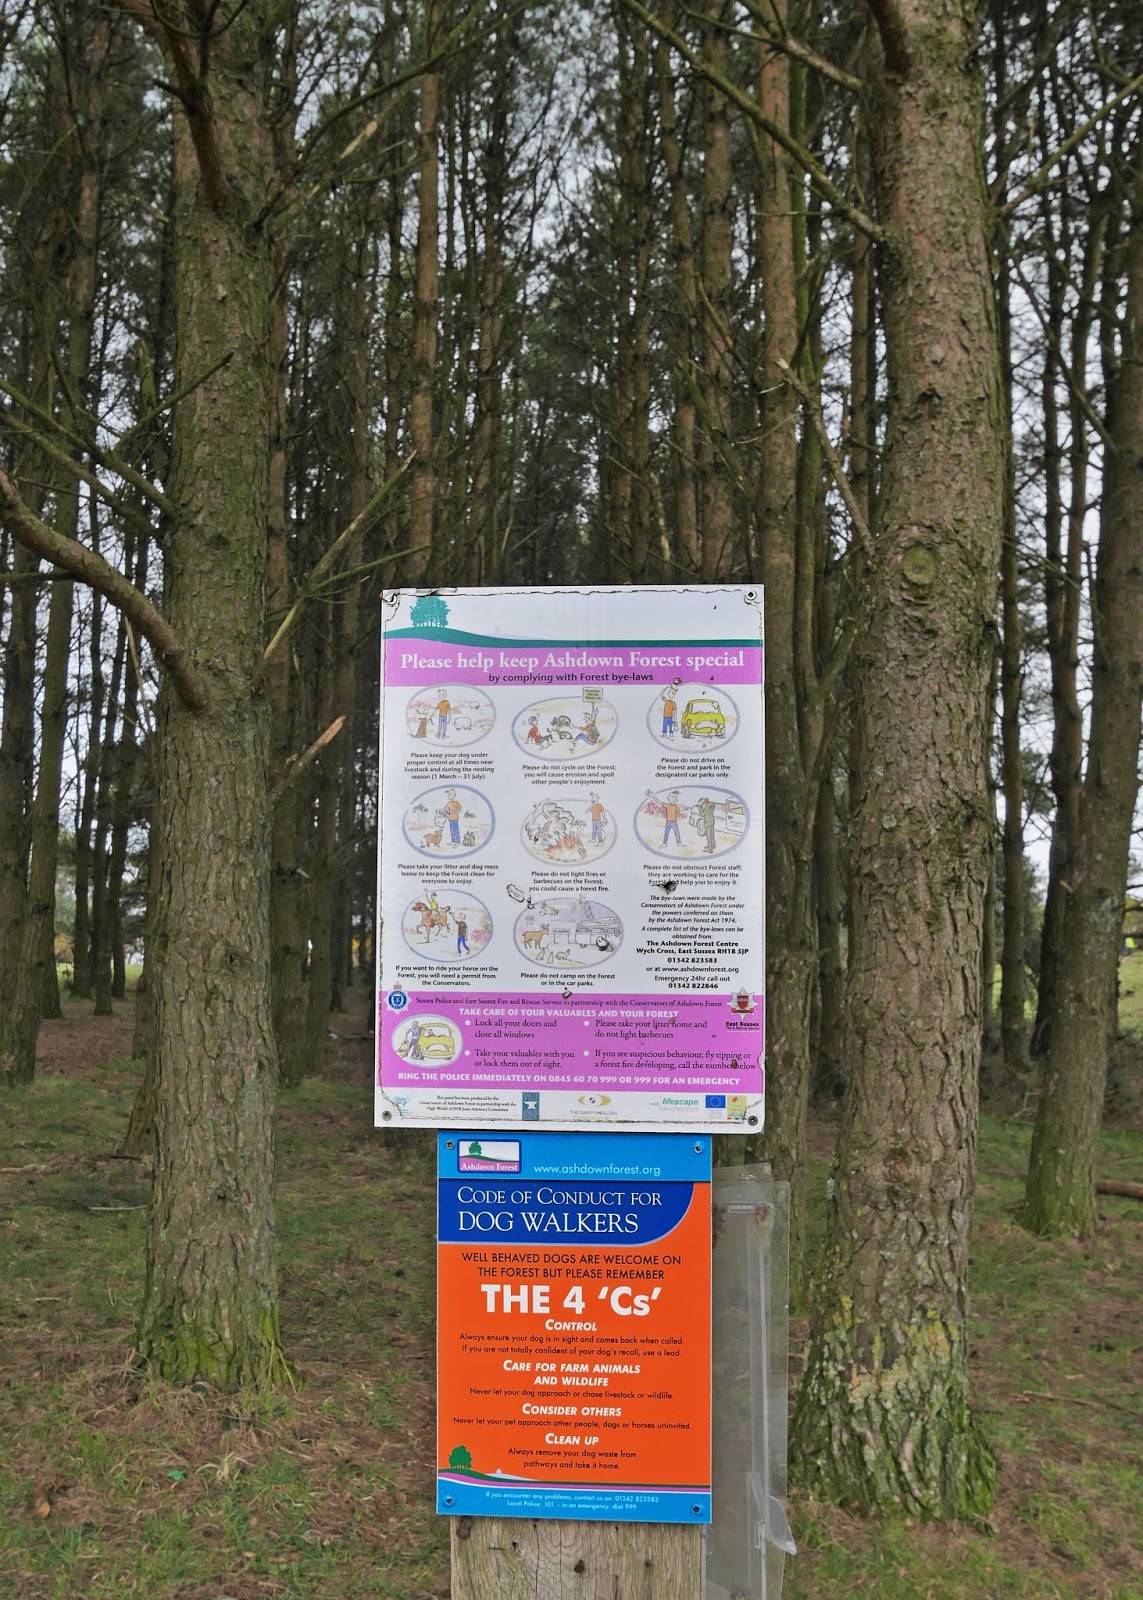 A sign in Ashdown Forest, East Sussex